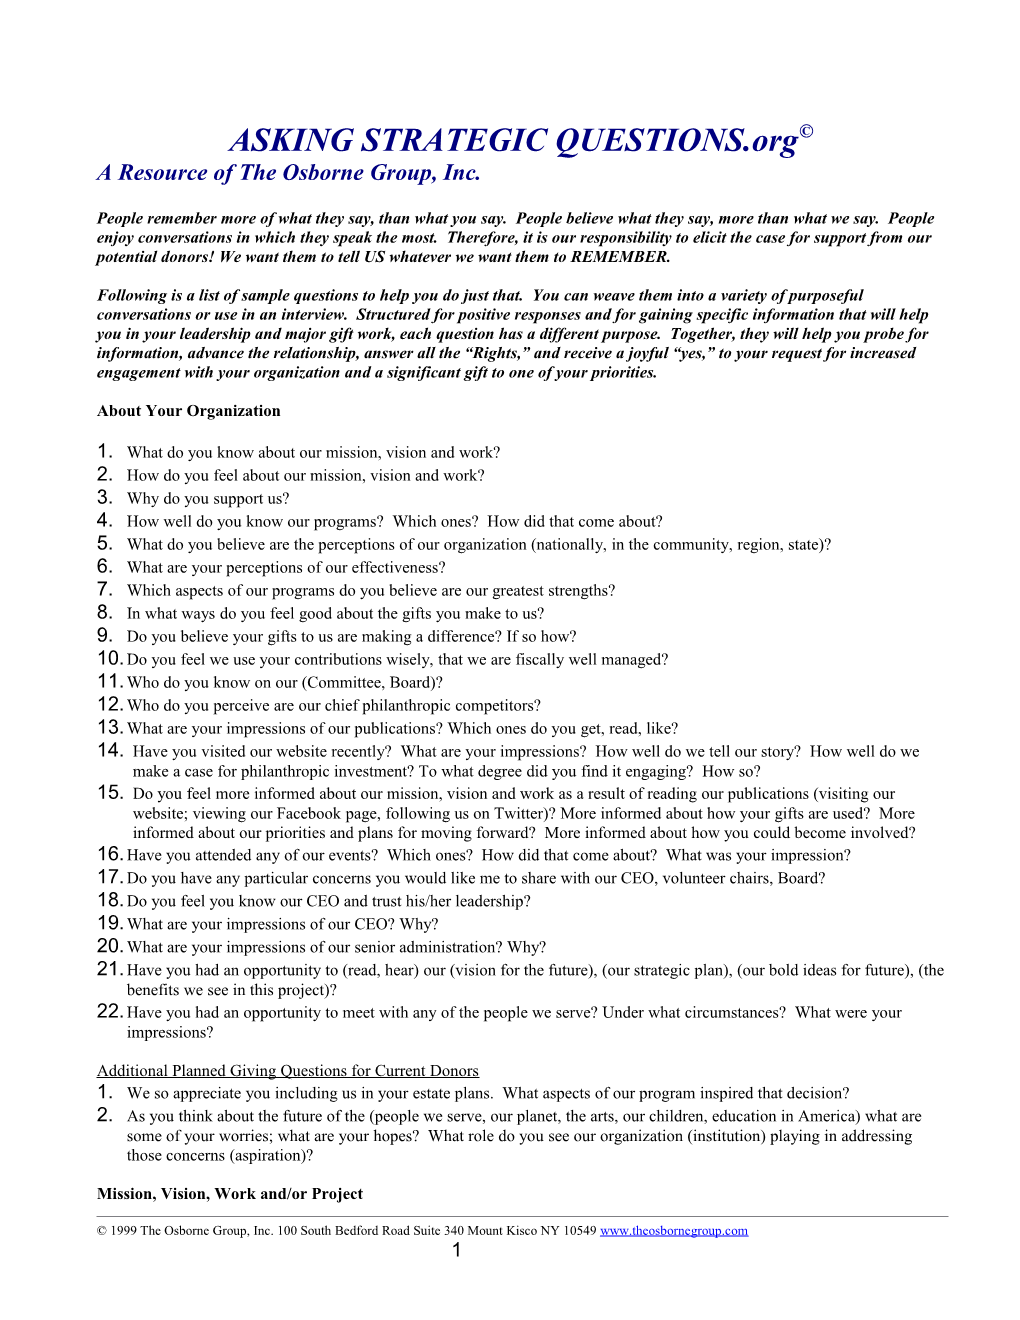 Following Is a Sample List of Questions That Can Be Interwoven in a Variety of Casual